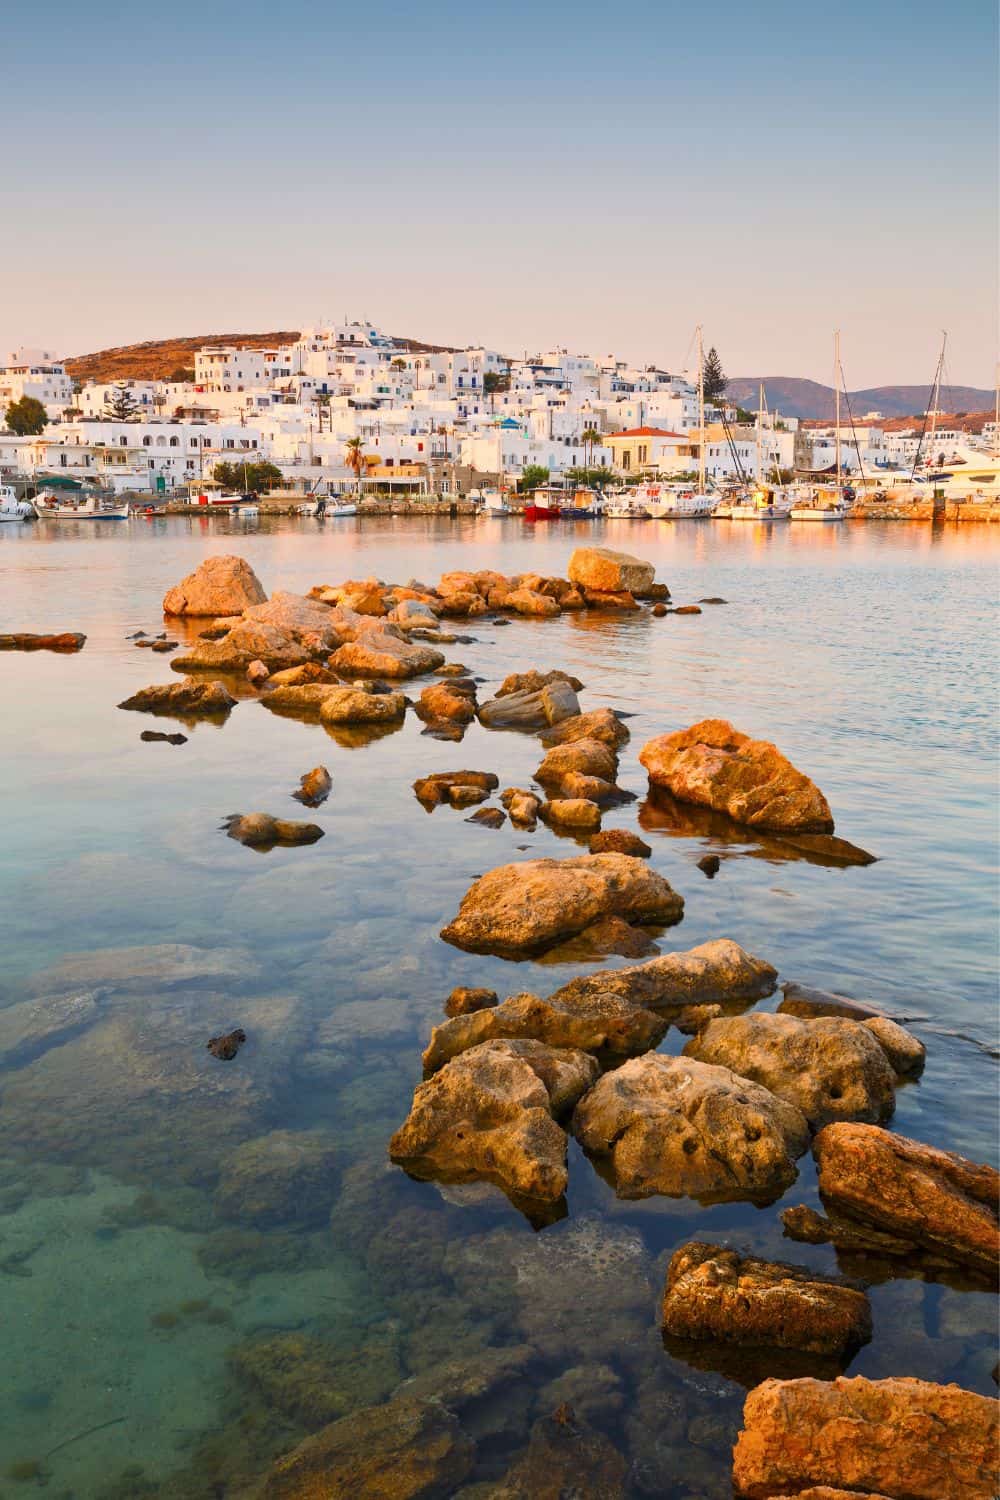 Golden hour at a Paros seaside: The warm glow of sunset illuminates the rocky shore and the calm sea, with the traditional whitewashed town in the background reflecting the last sunbeams.